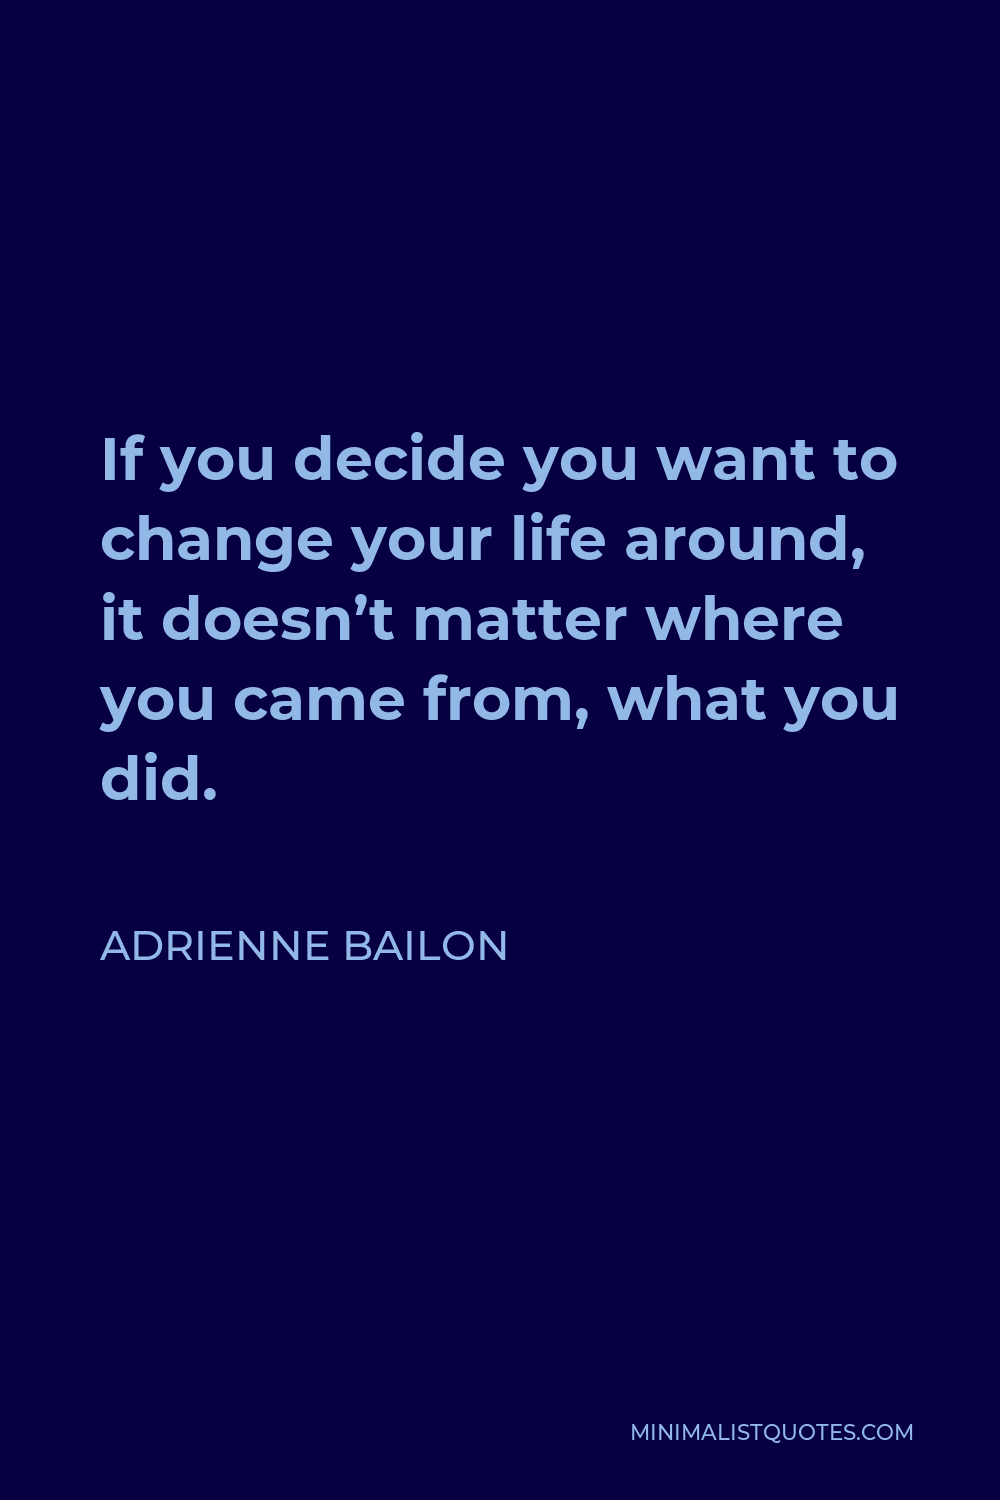 Adrienne Bailon Quote - If you decide you want to change your life around, it doesn’t matter where you came from, what you did.